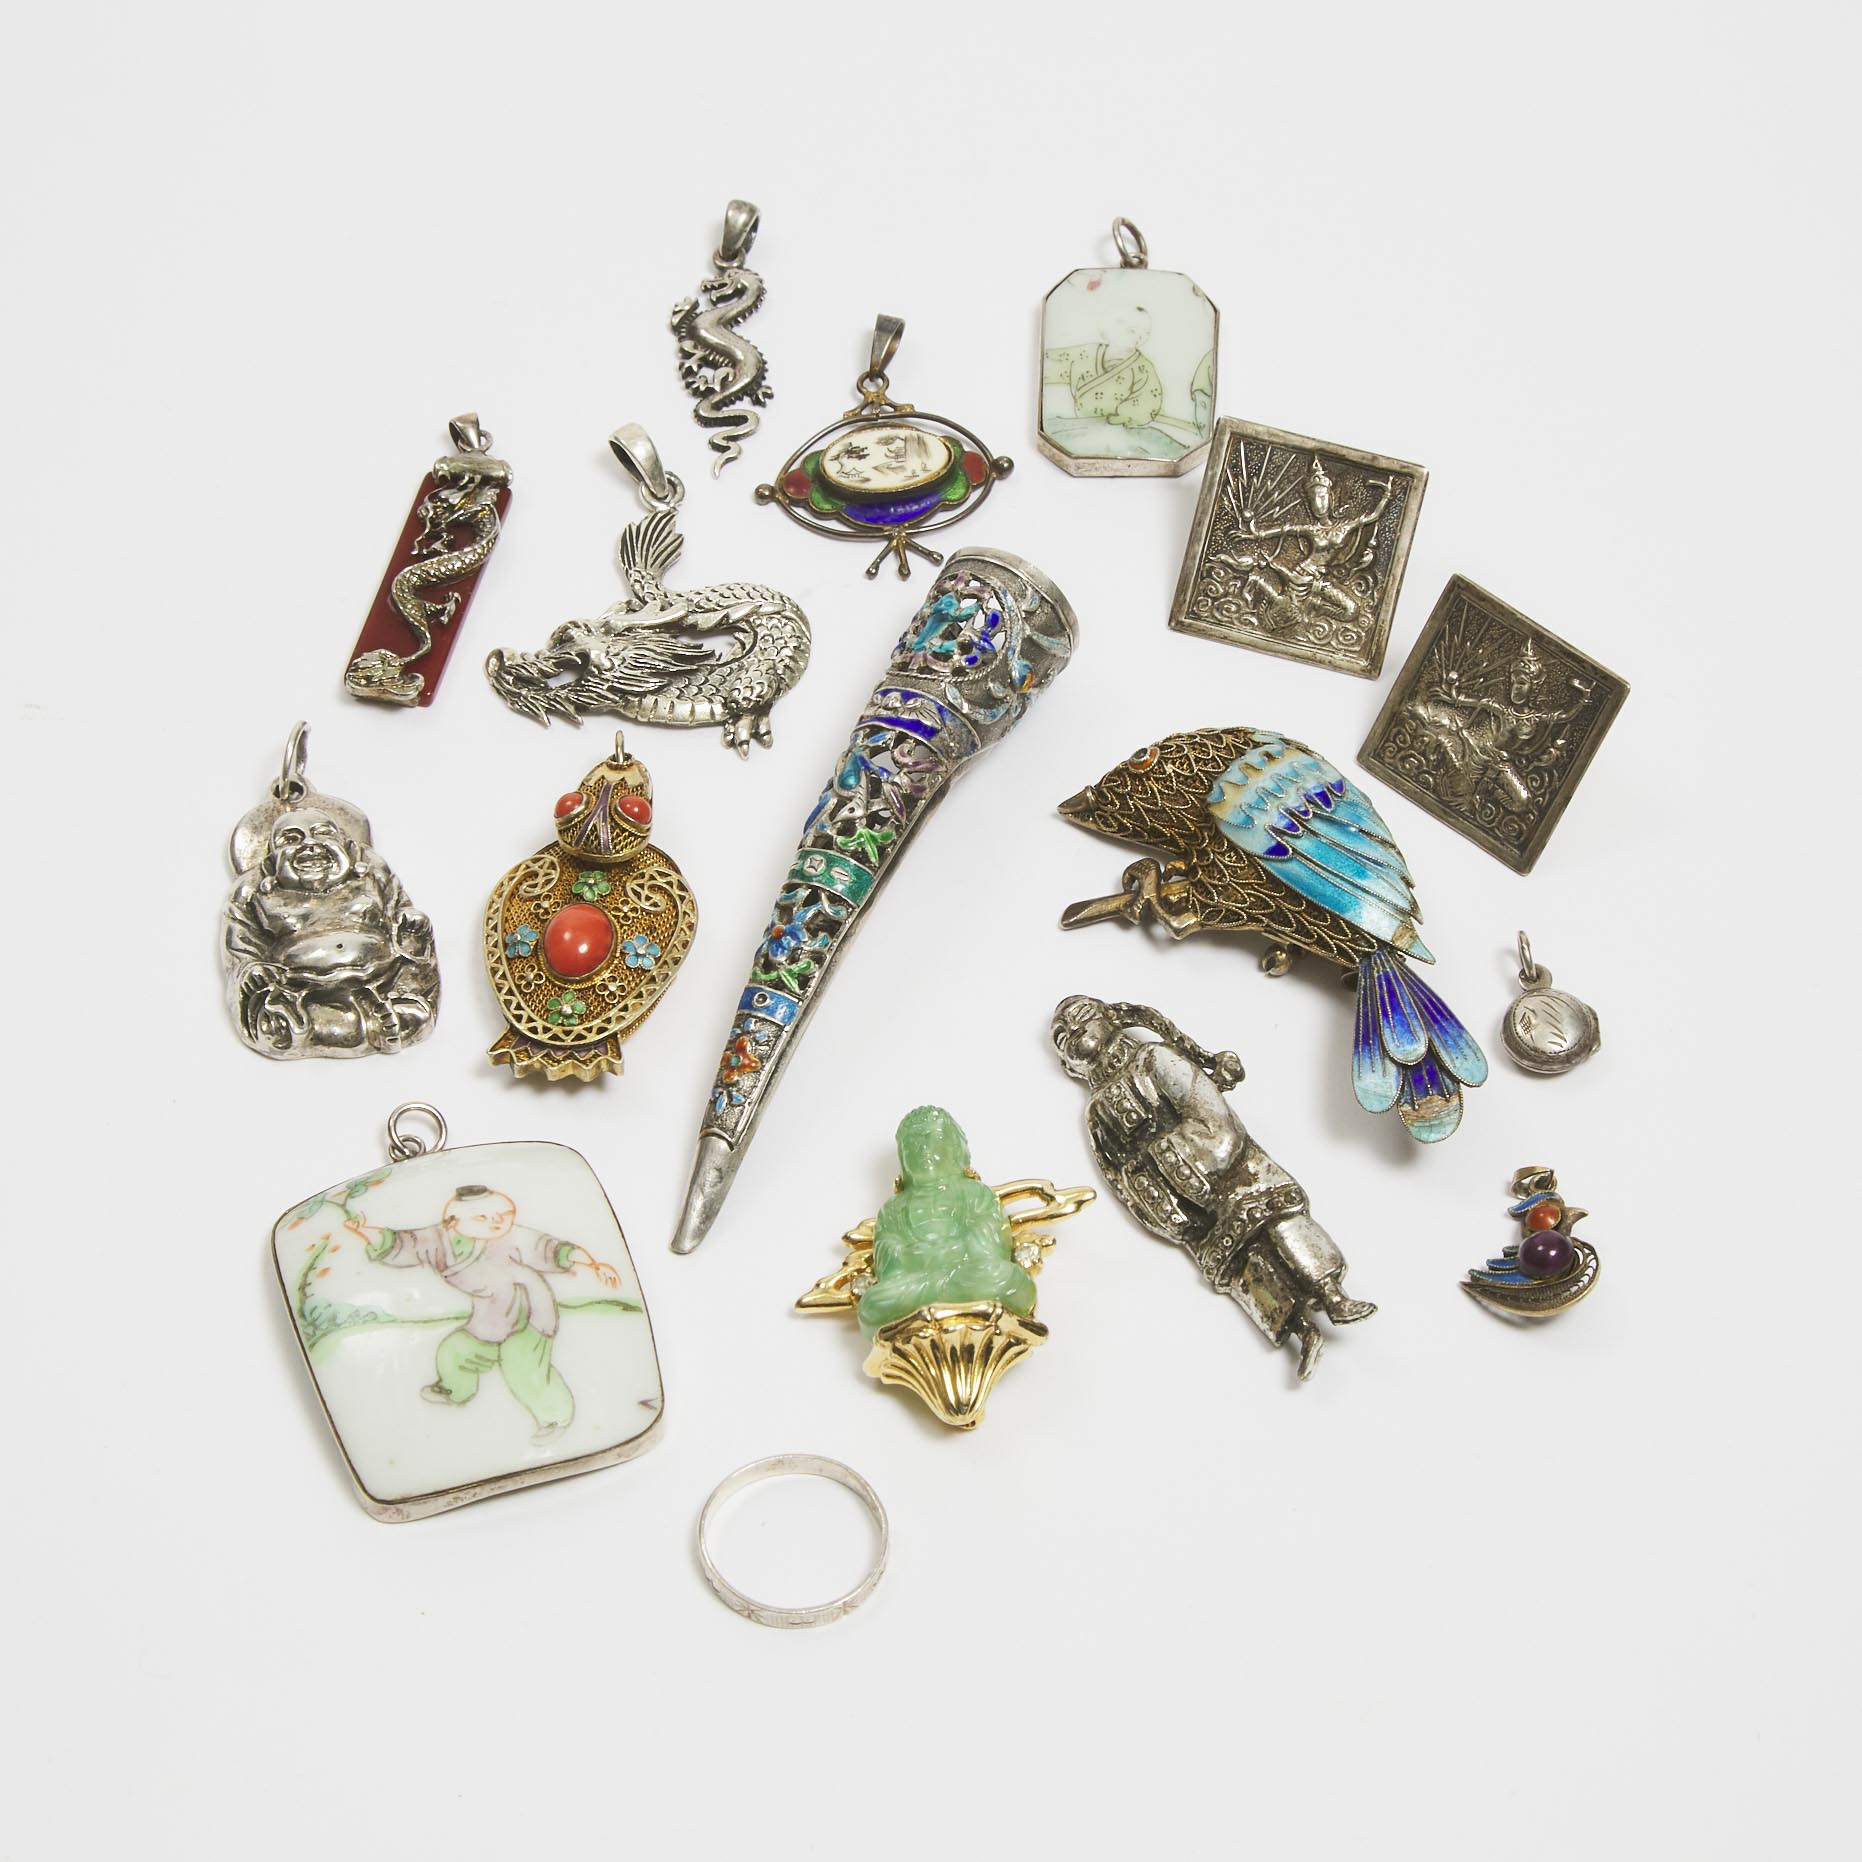 A Large Quantity of Silver, Enameled